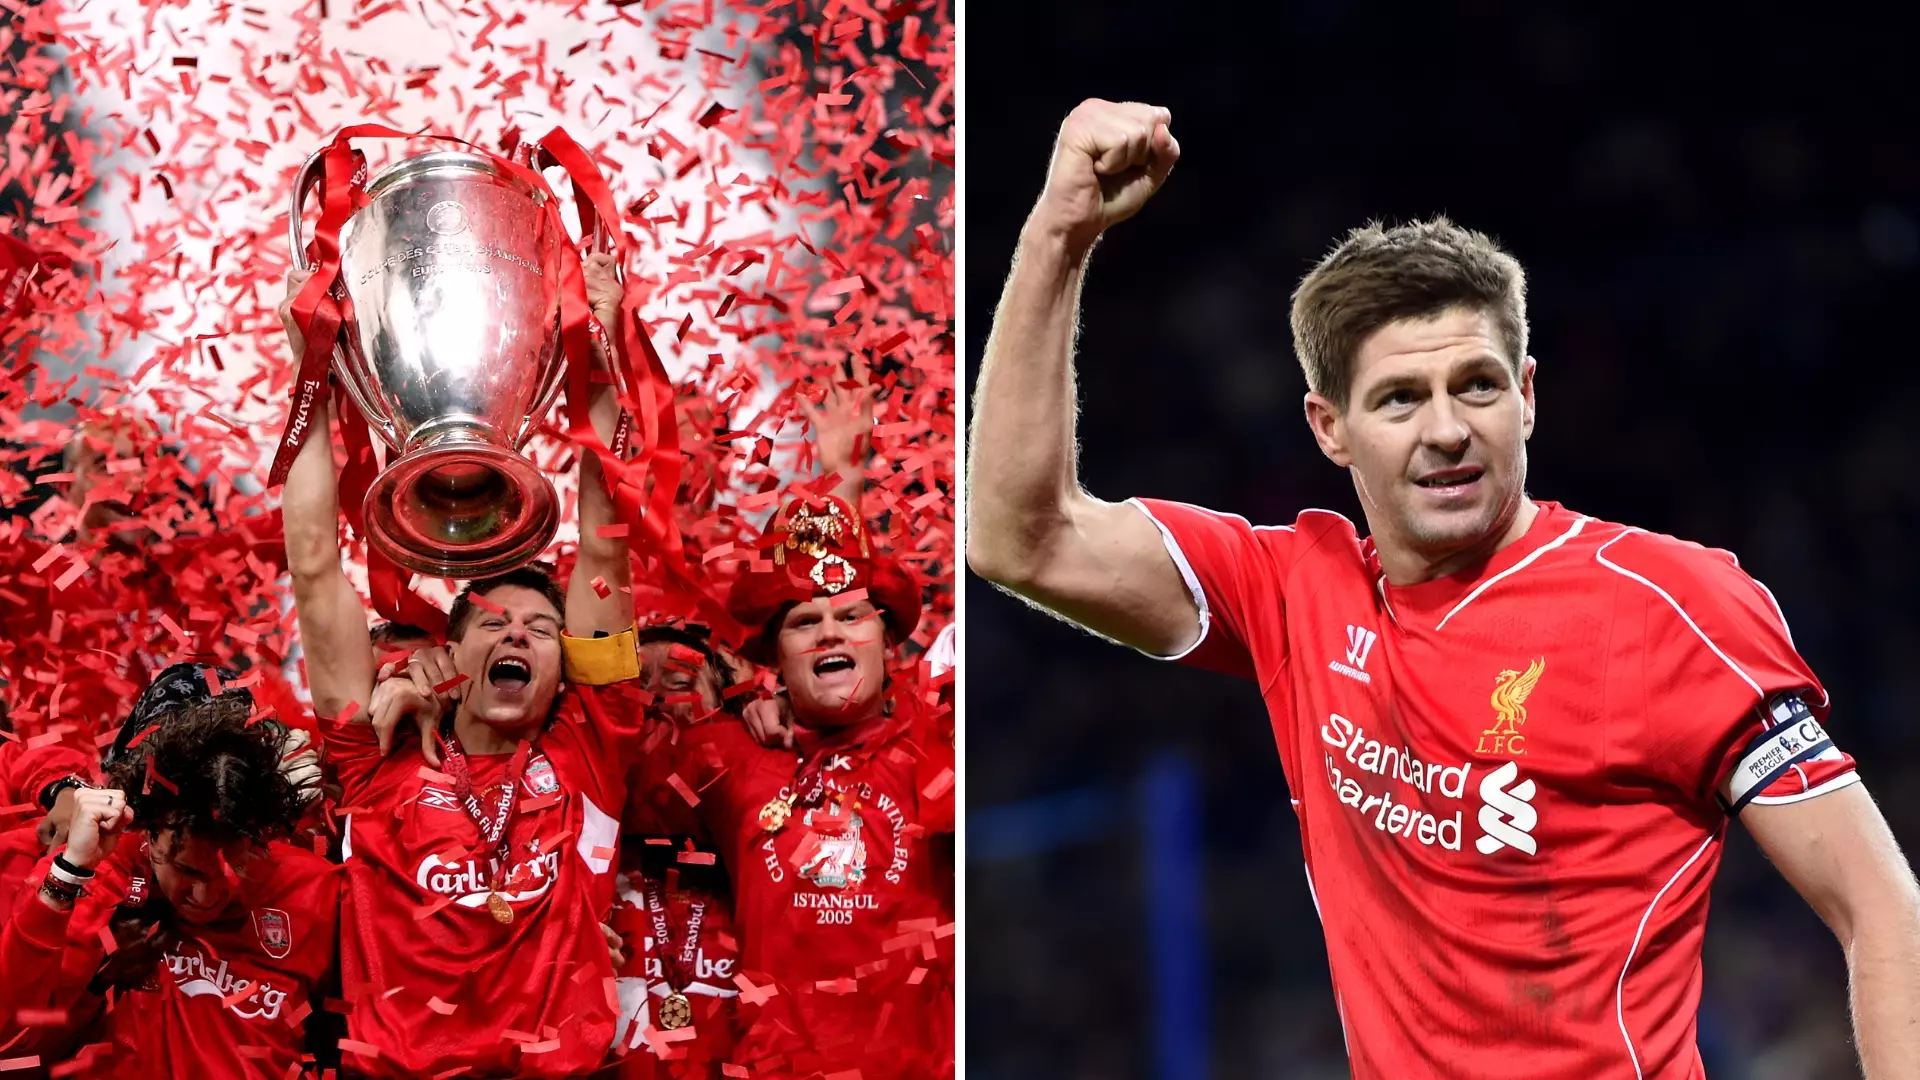 Amazon Scores Big With Steven Gerrard Documentary Coming To Prime Video